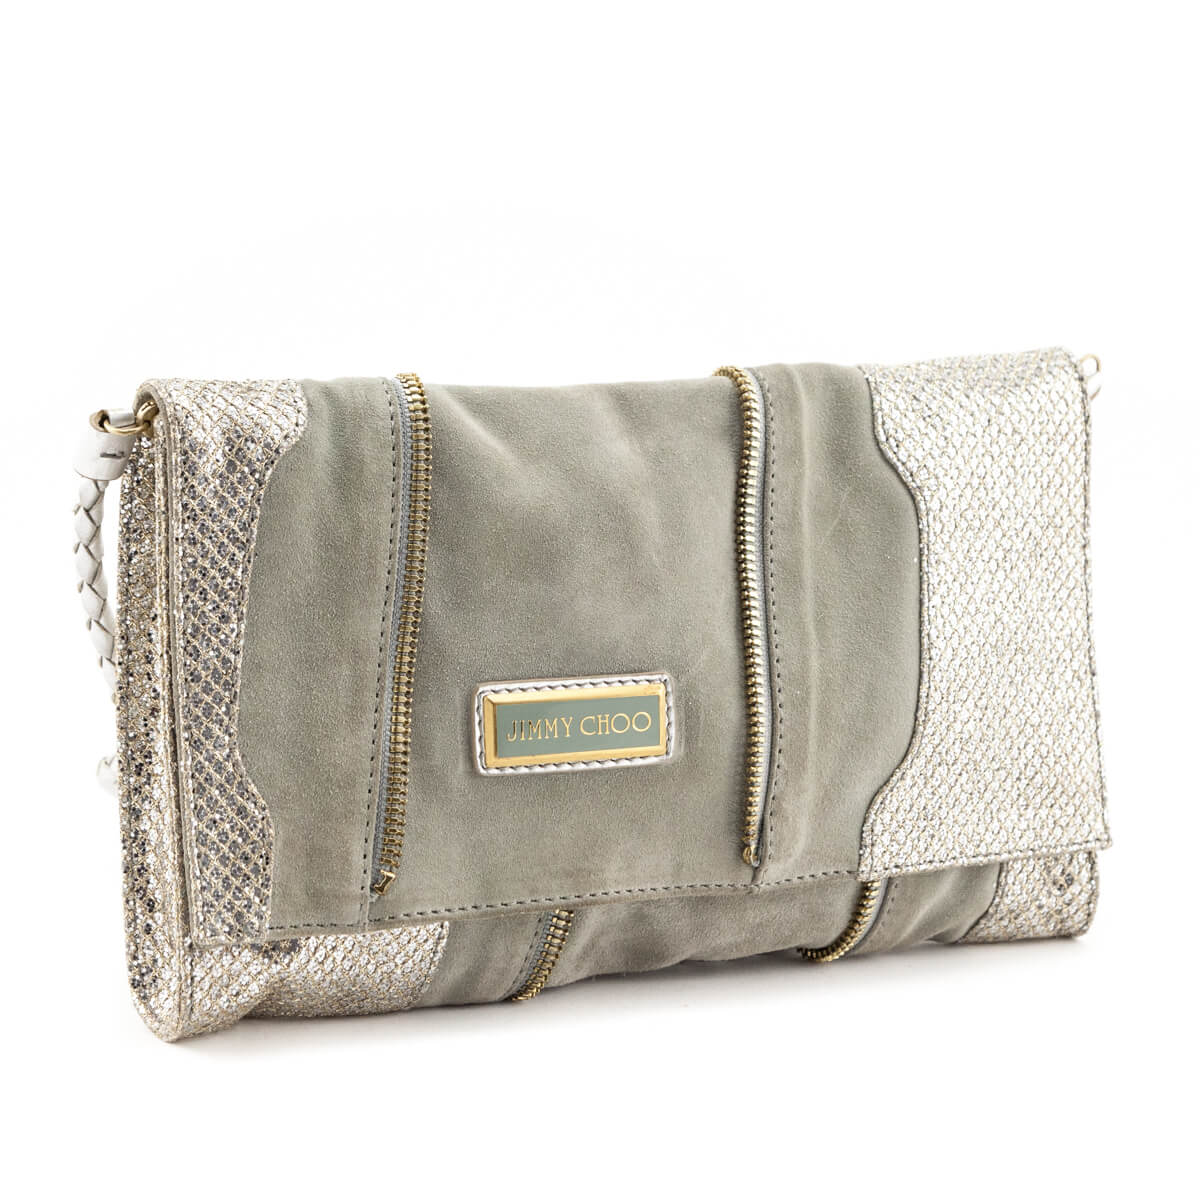 Jimmy Choo Gray Suede & Silver Glitter Zip Embellished Convertible Clutch - Love that Bag etc - Preowned Authentic Designer Handbags & Preloved Fashions